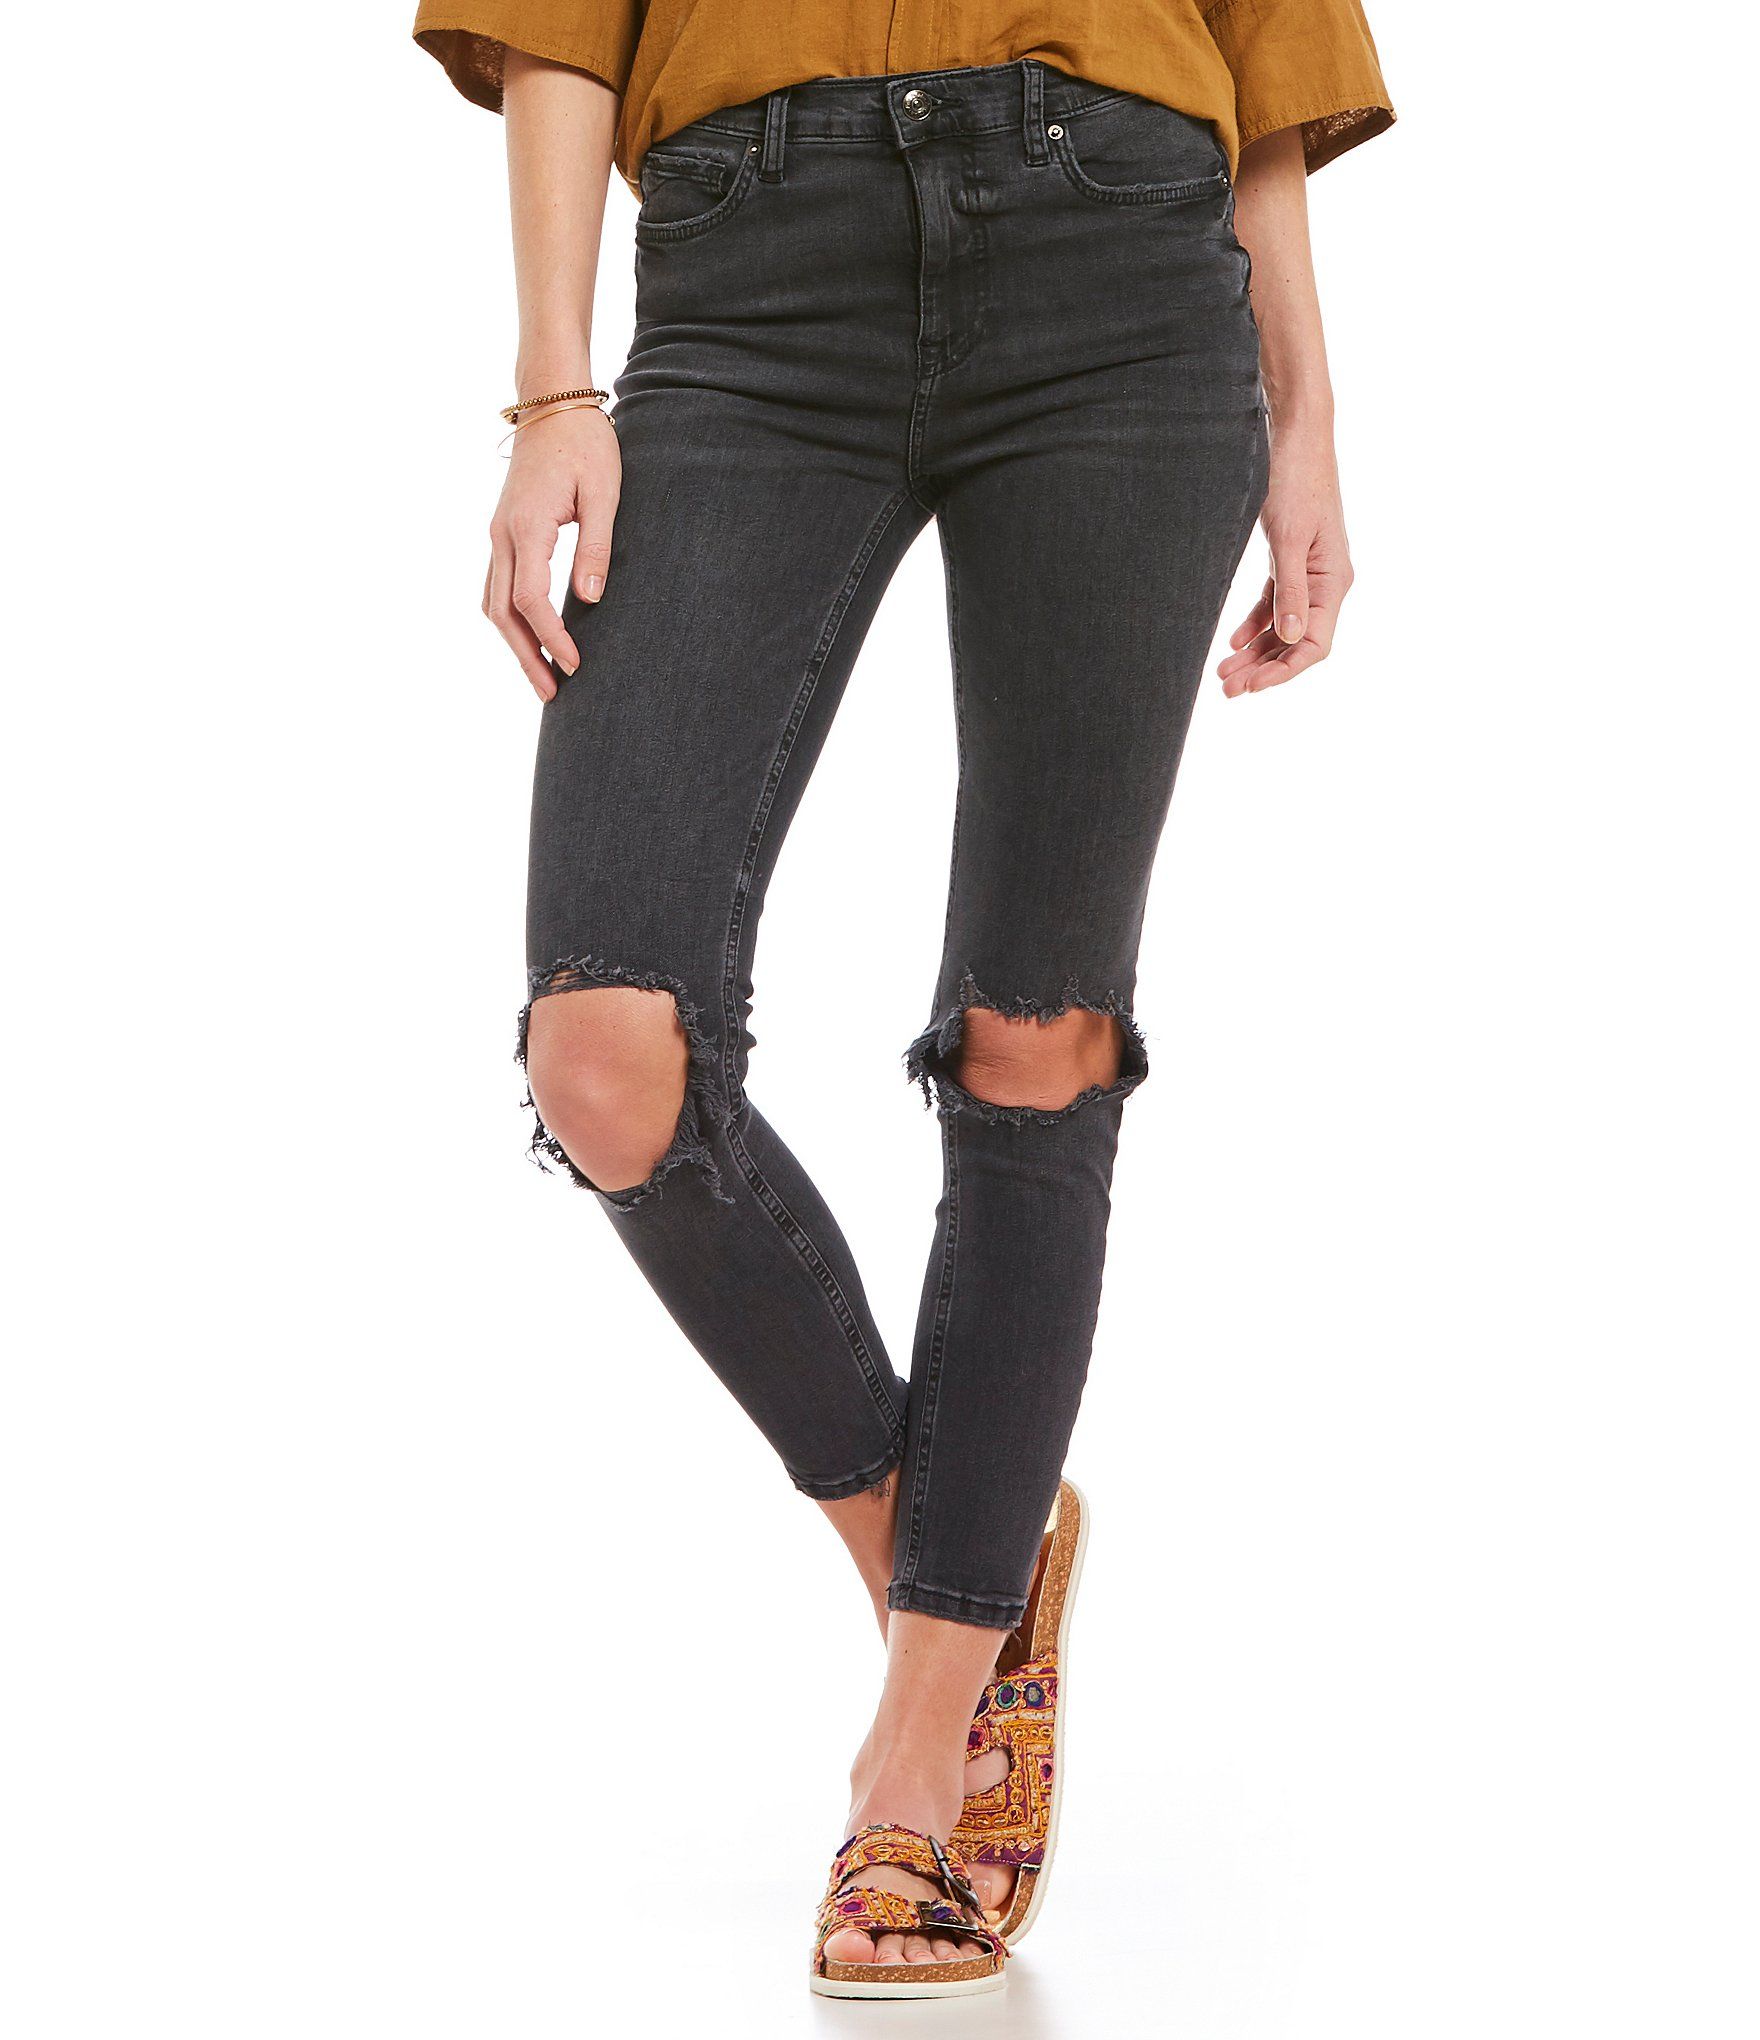 Free People We the Free High Rise Busted Skinny Jeans | Dillards Inc.